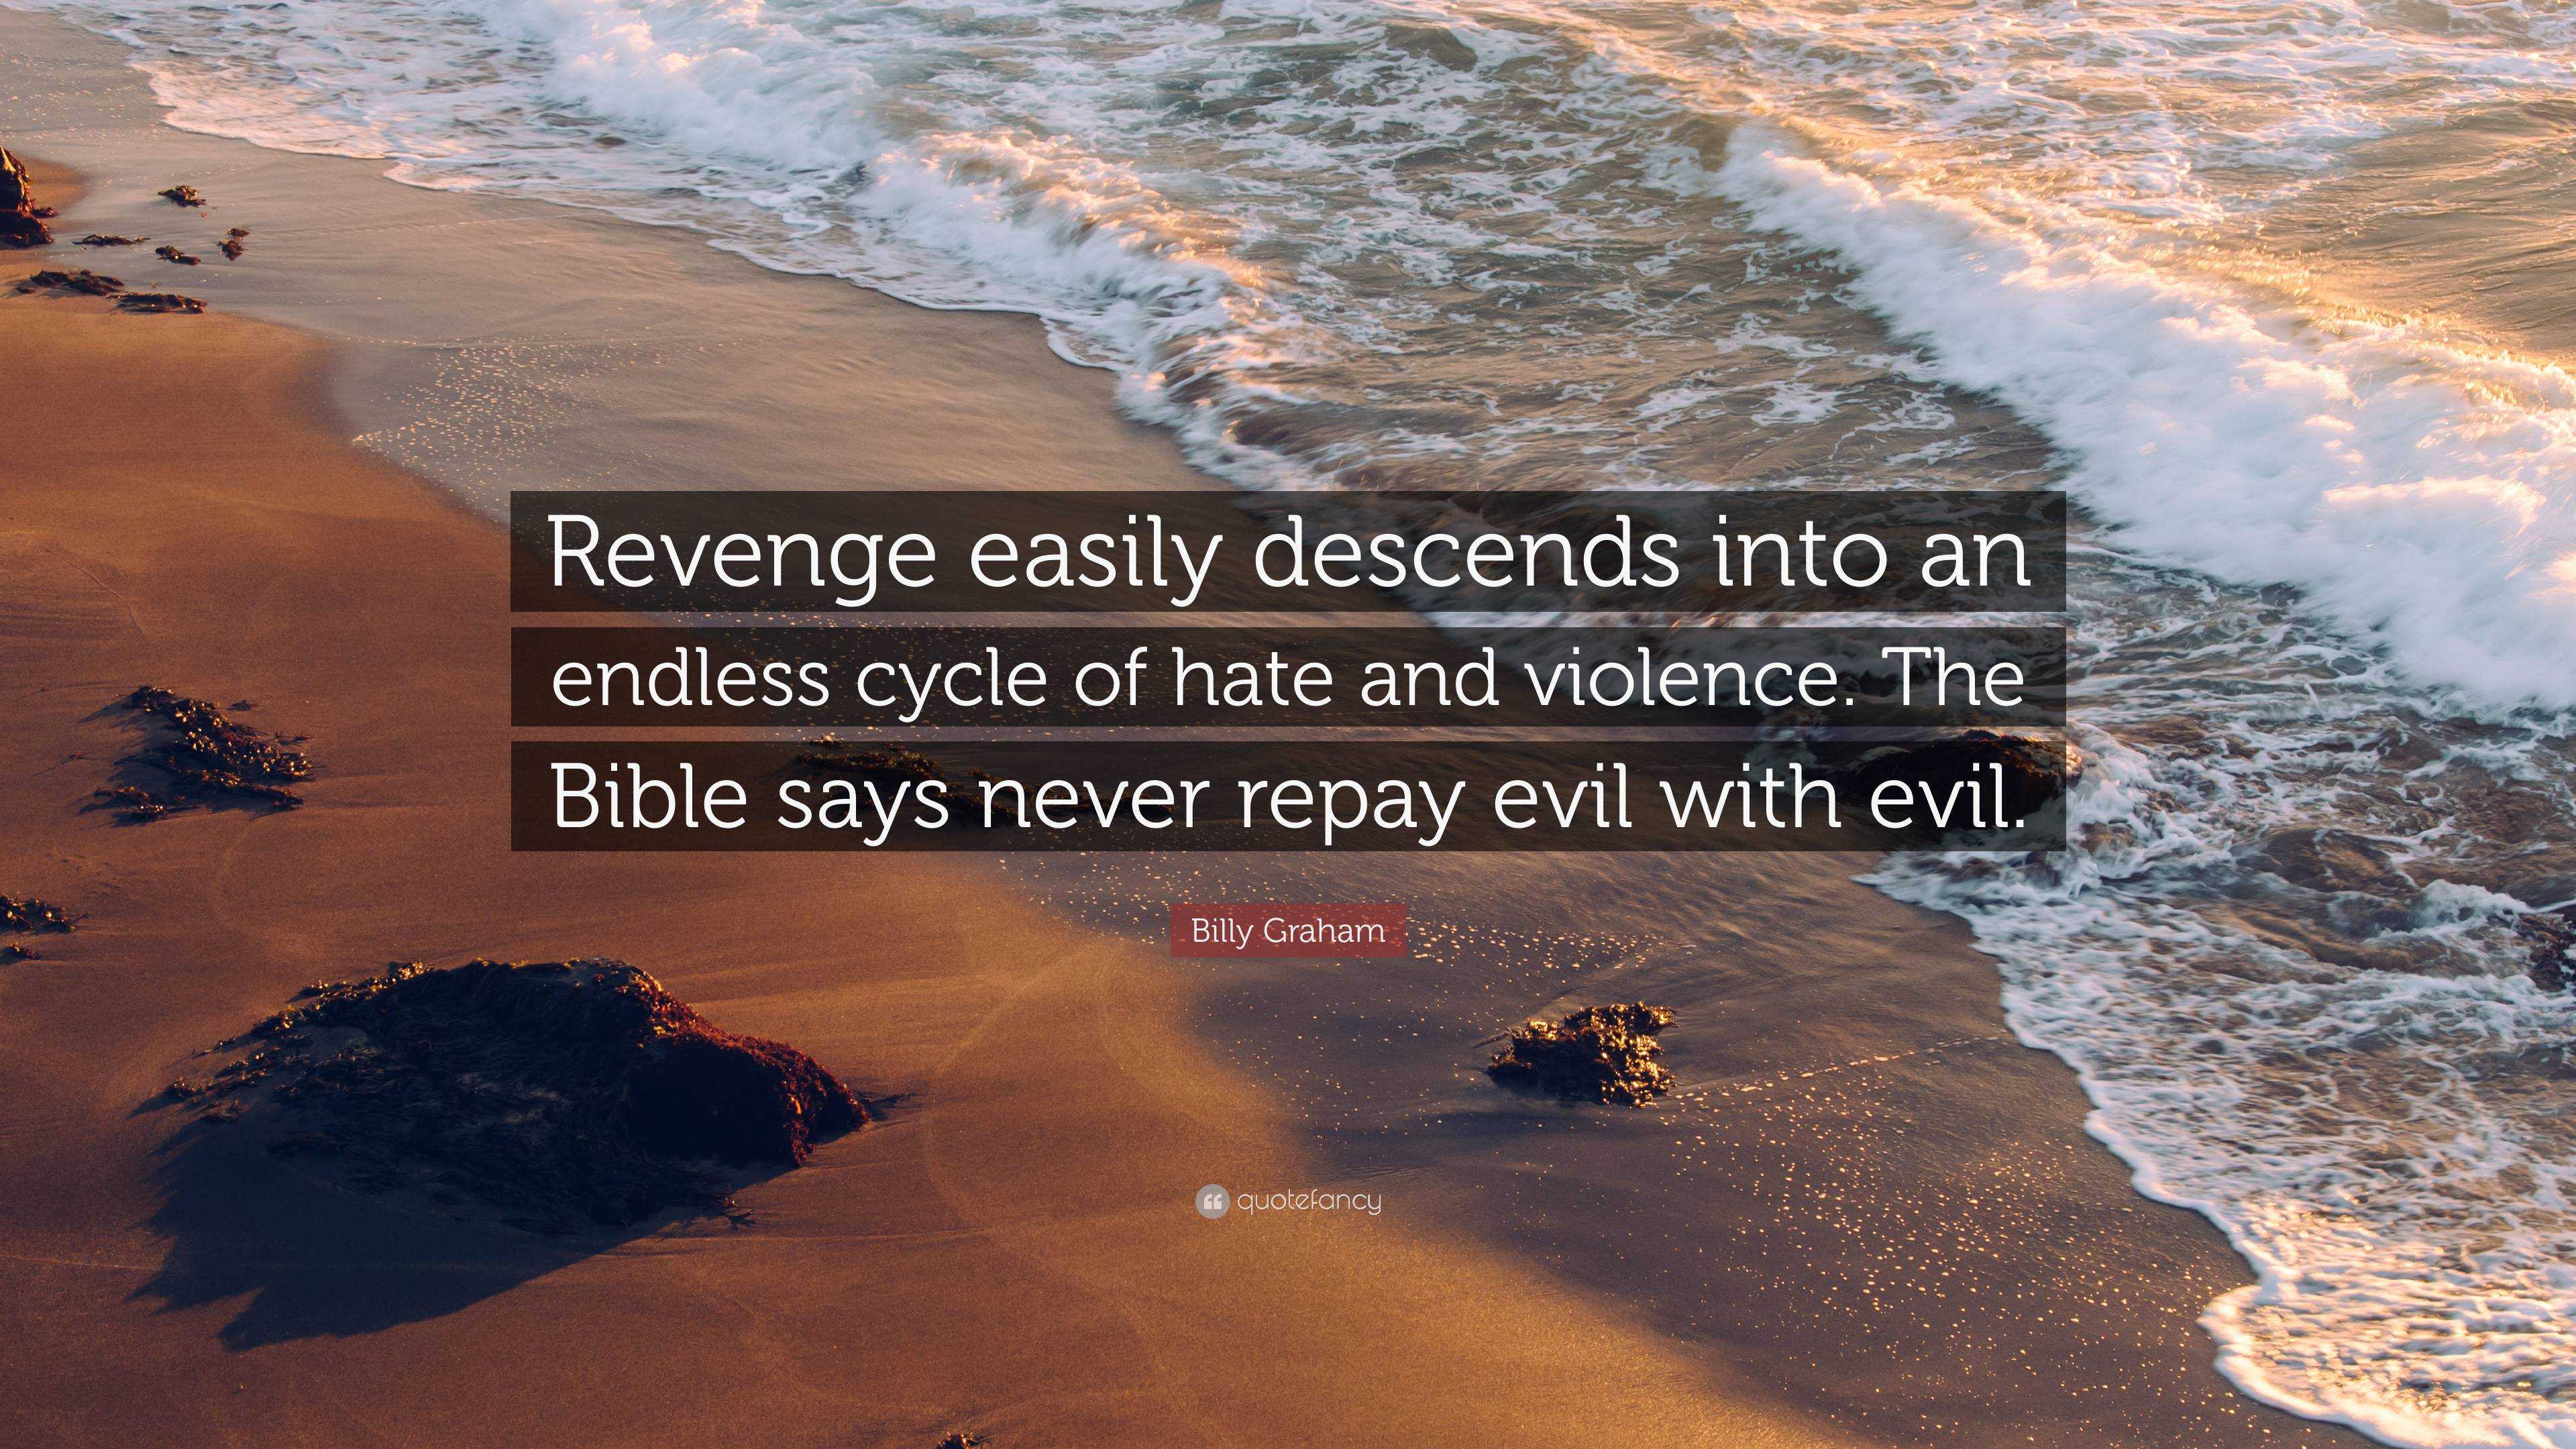 What does the Bible say about revenge?